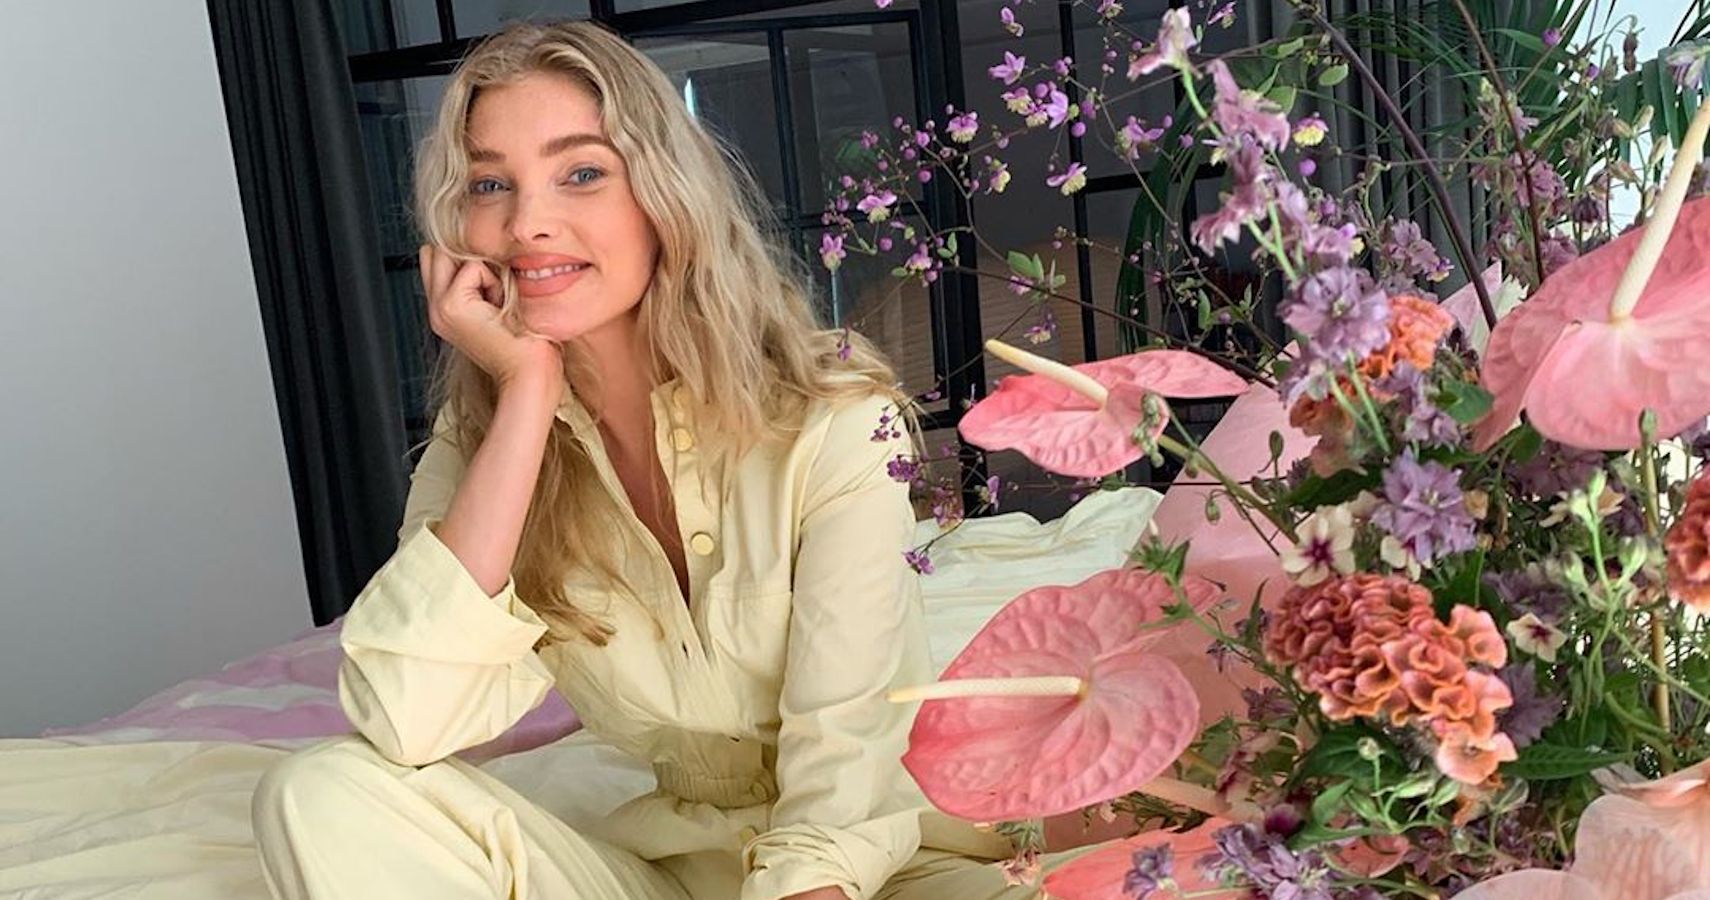 Elsa Hosk revealed she's pregnant with her first child.